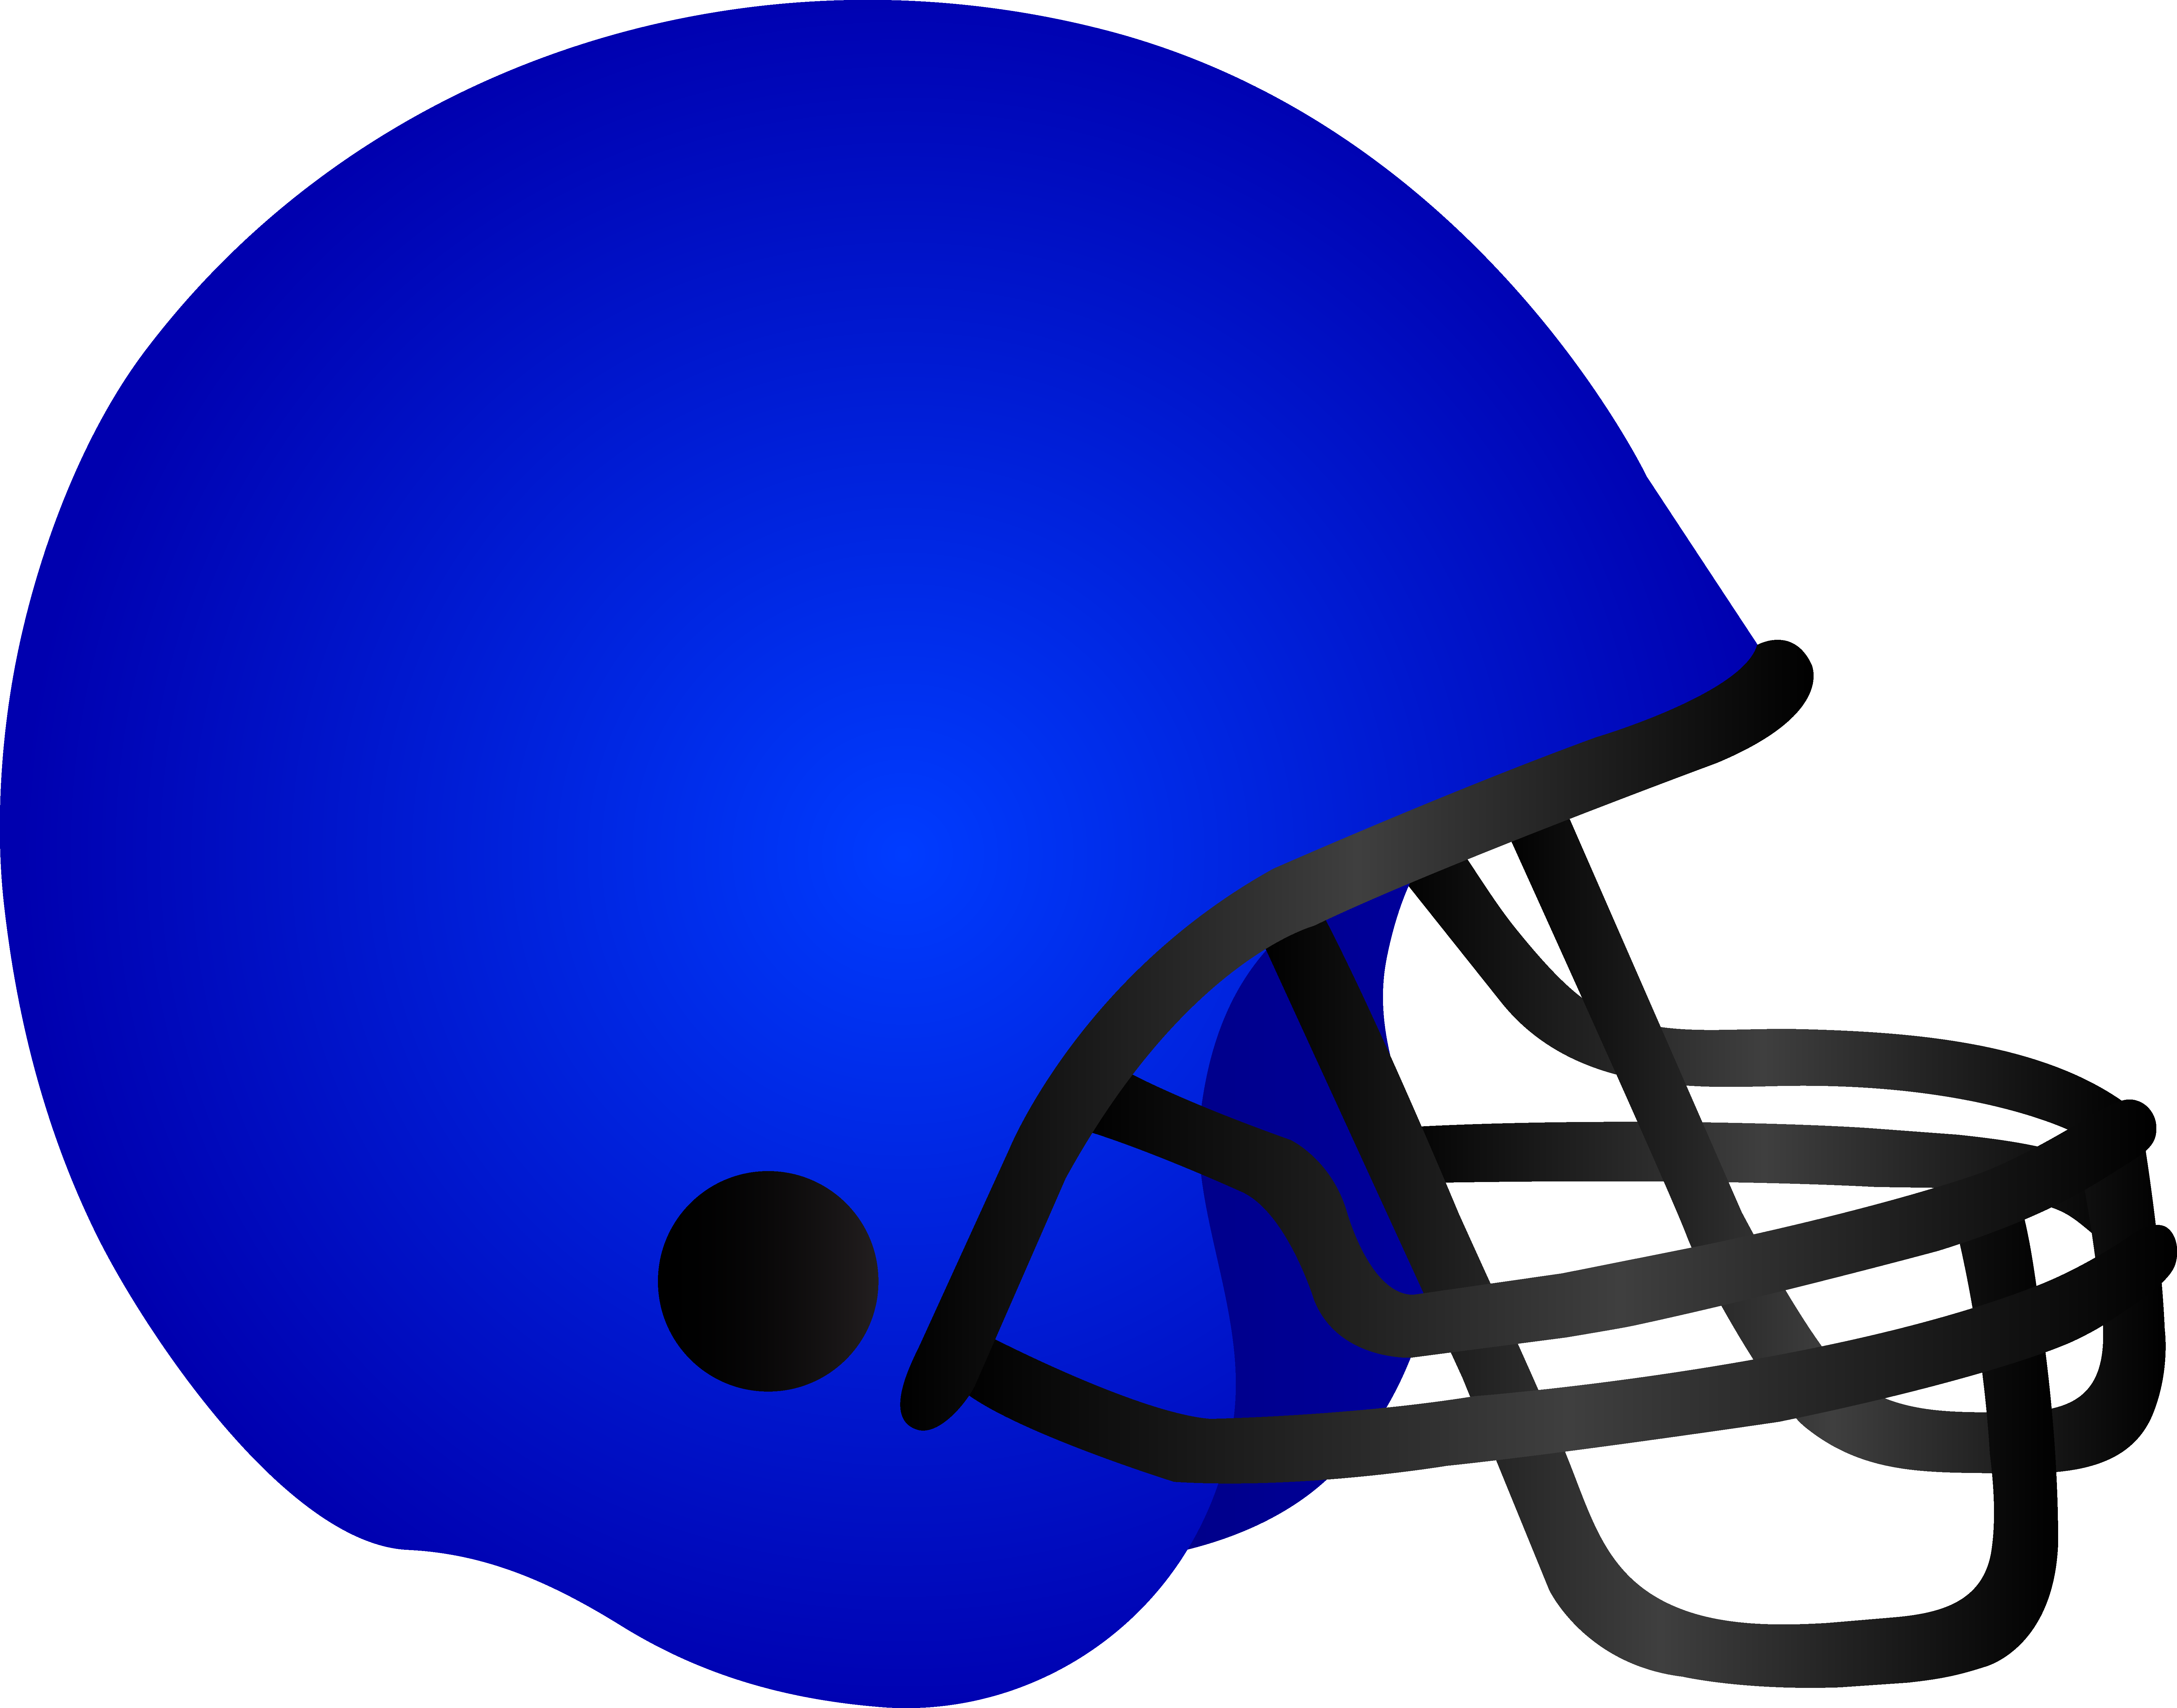 Cartoon Football Helmet Front View Images & Pictures - Becuo